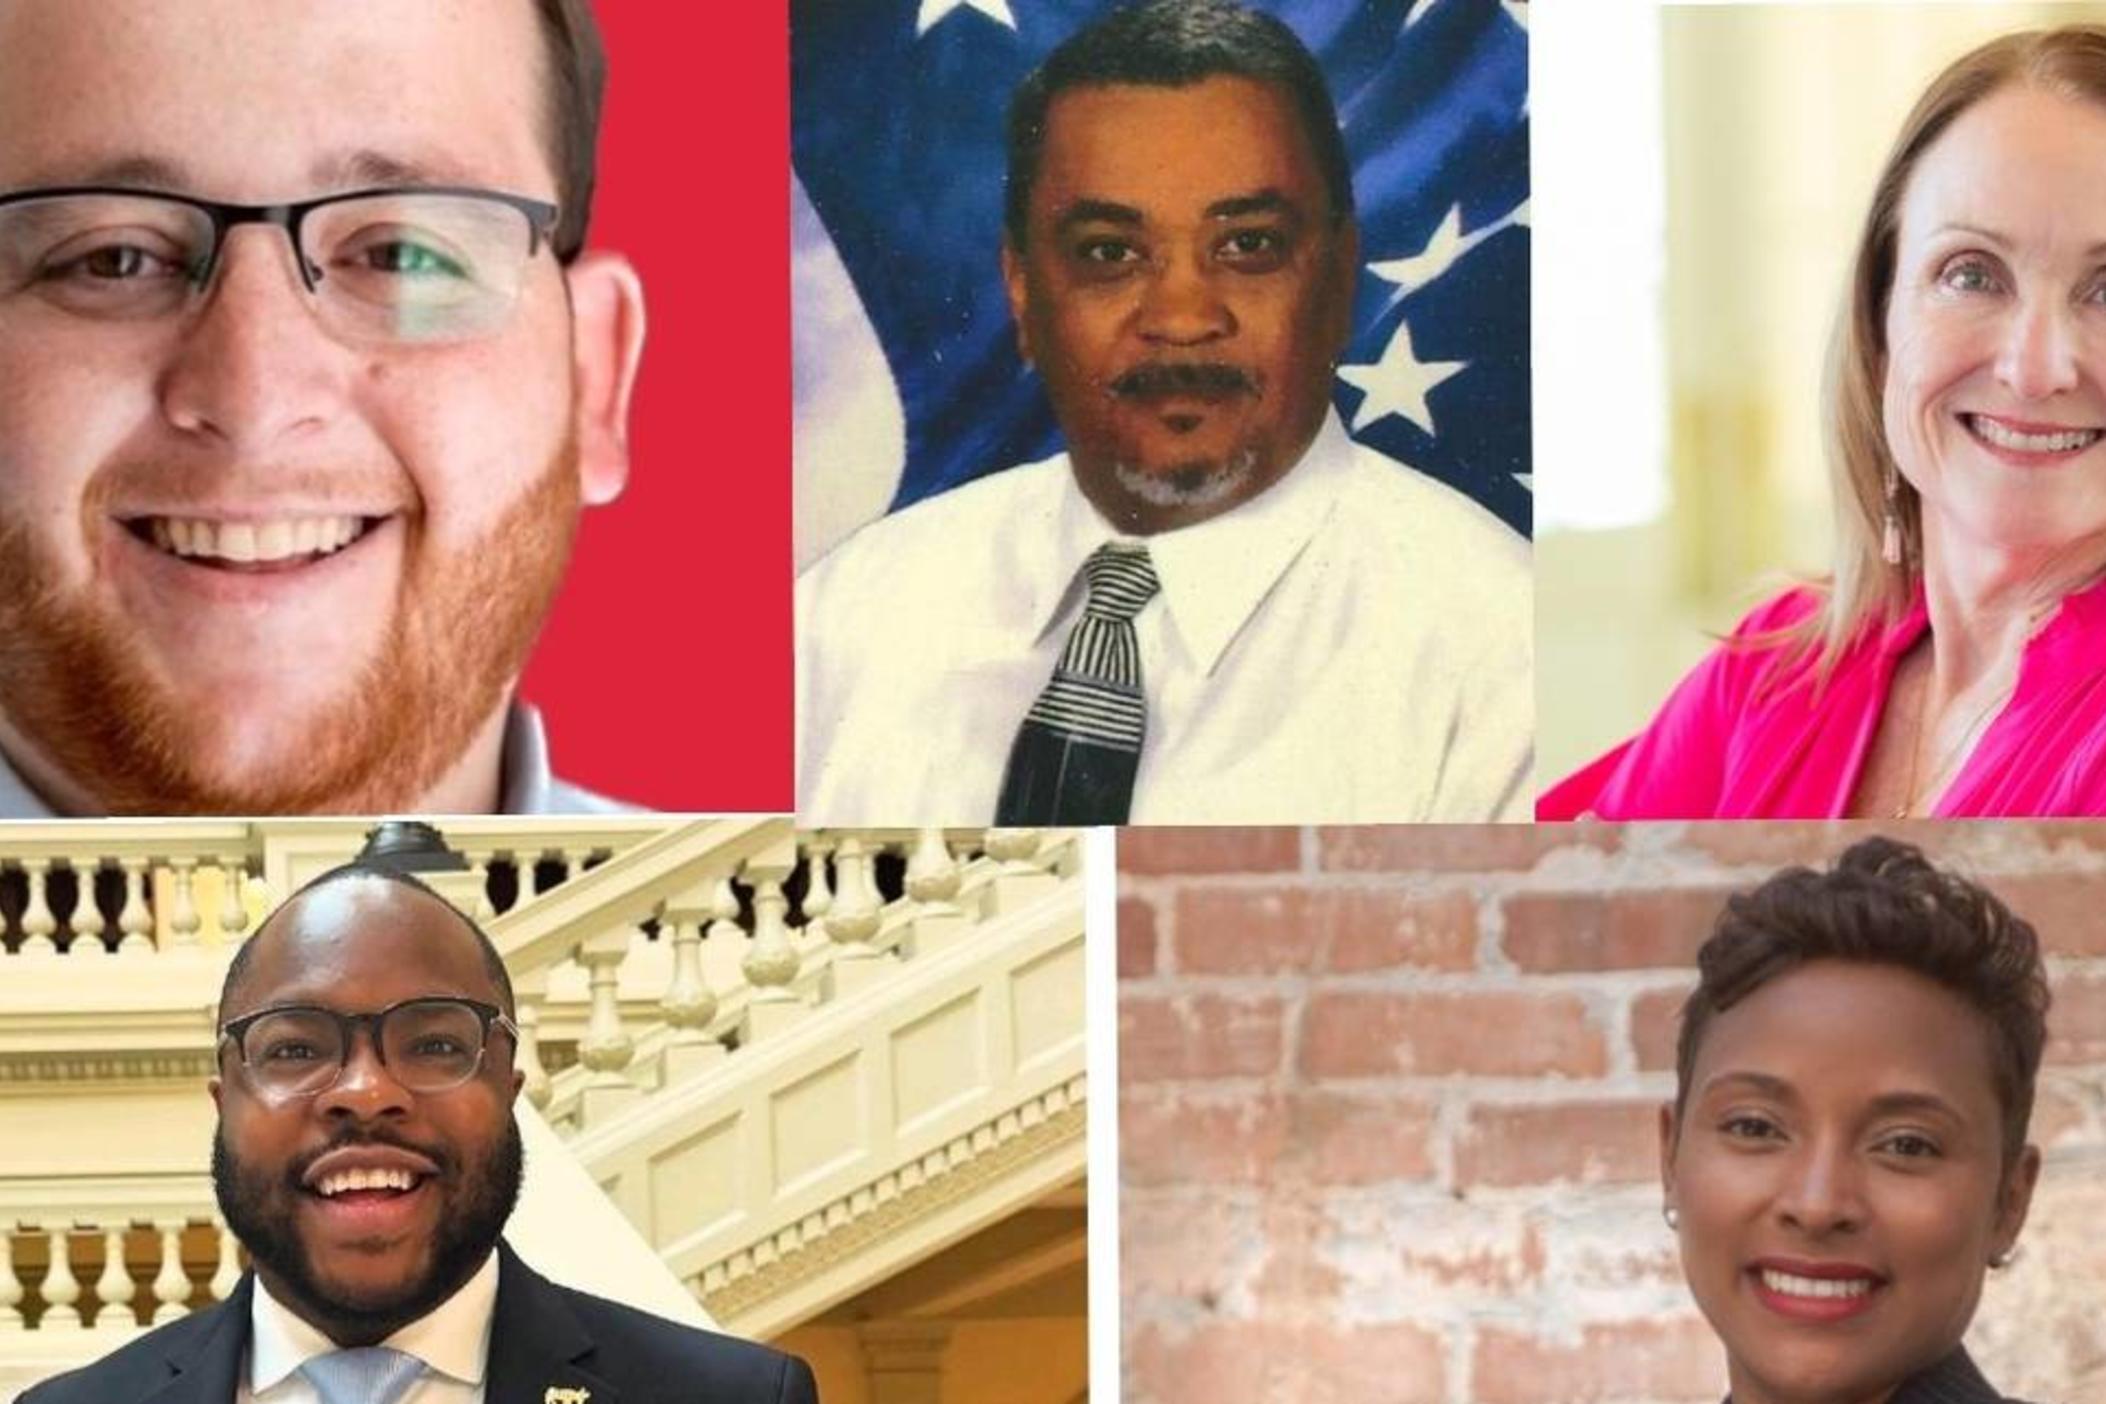 Six candidates, including five pictured here, are running for State House representative District 145.